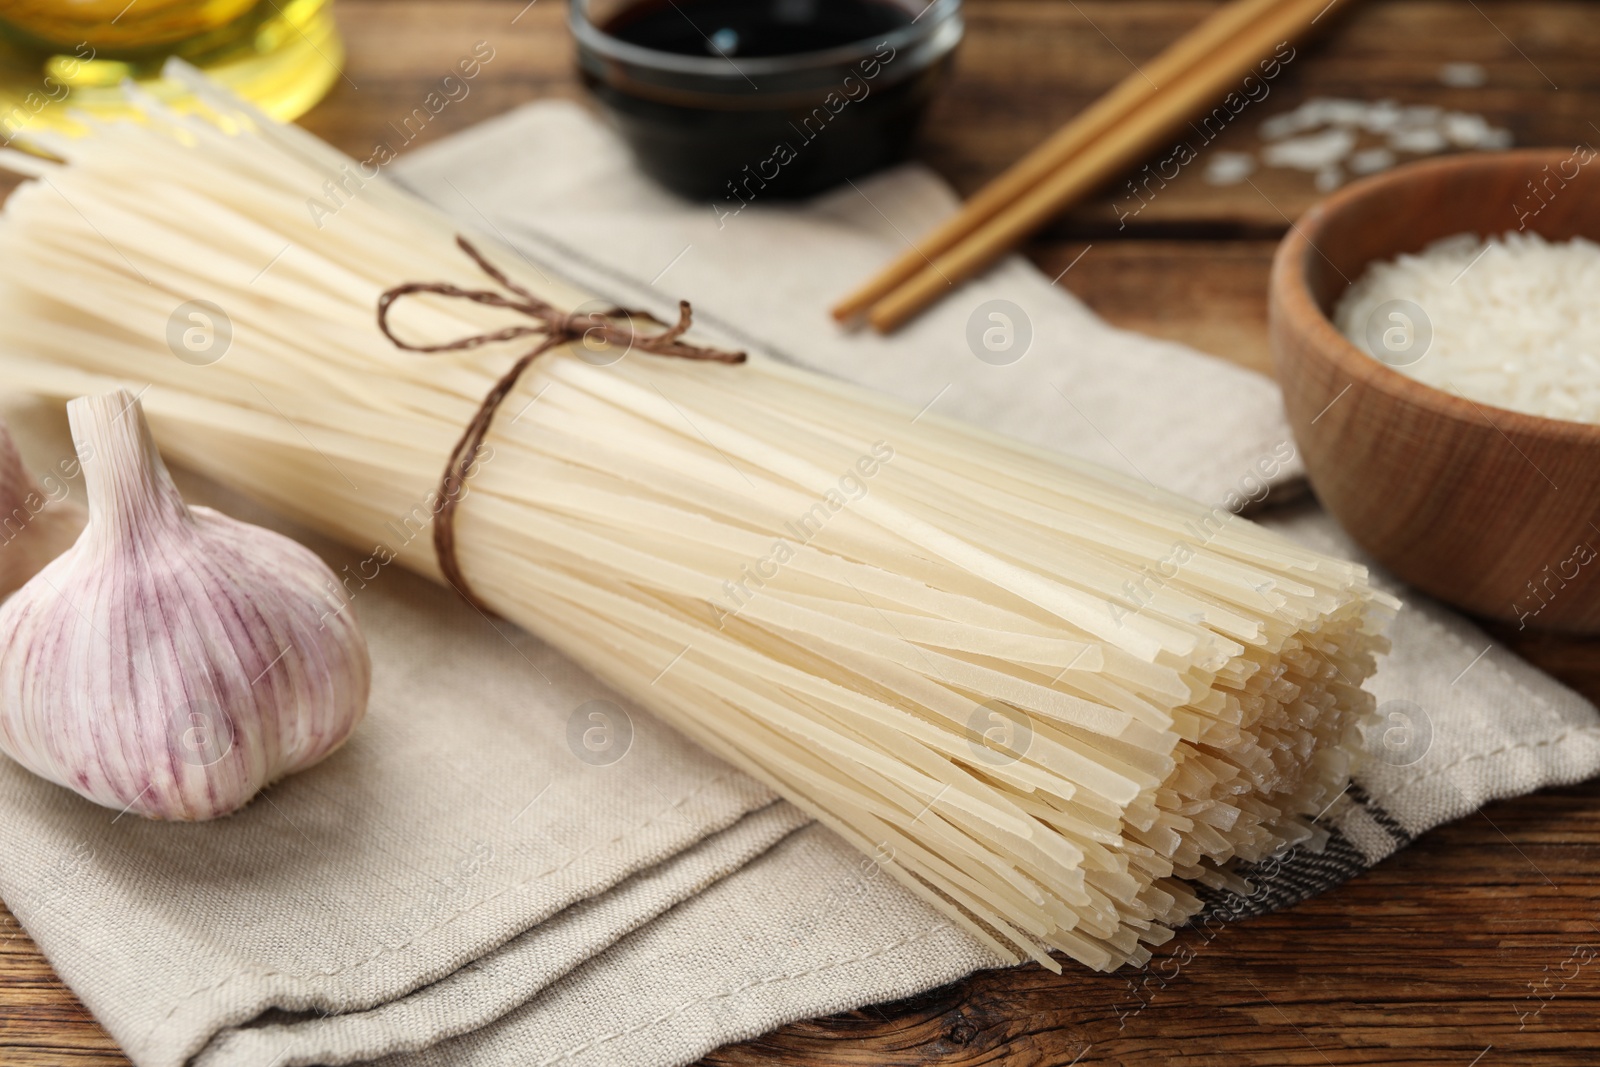 Photo of Uncooked rice noodles on wooden table, closeup